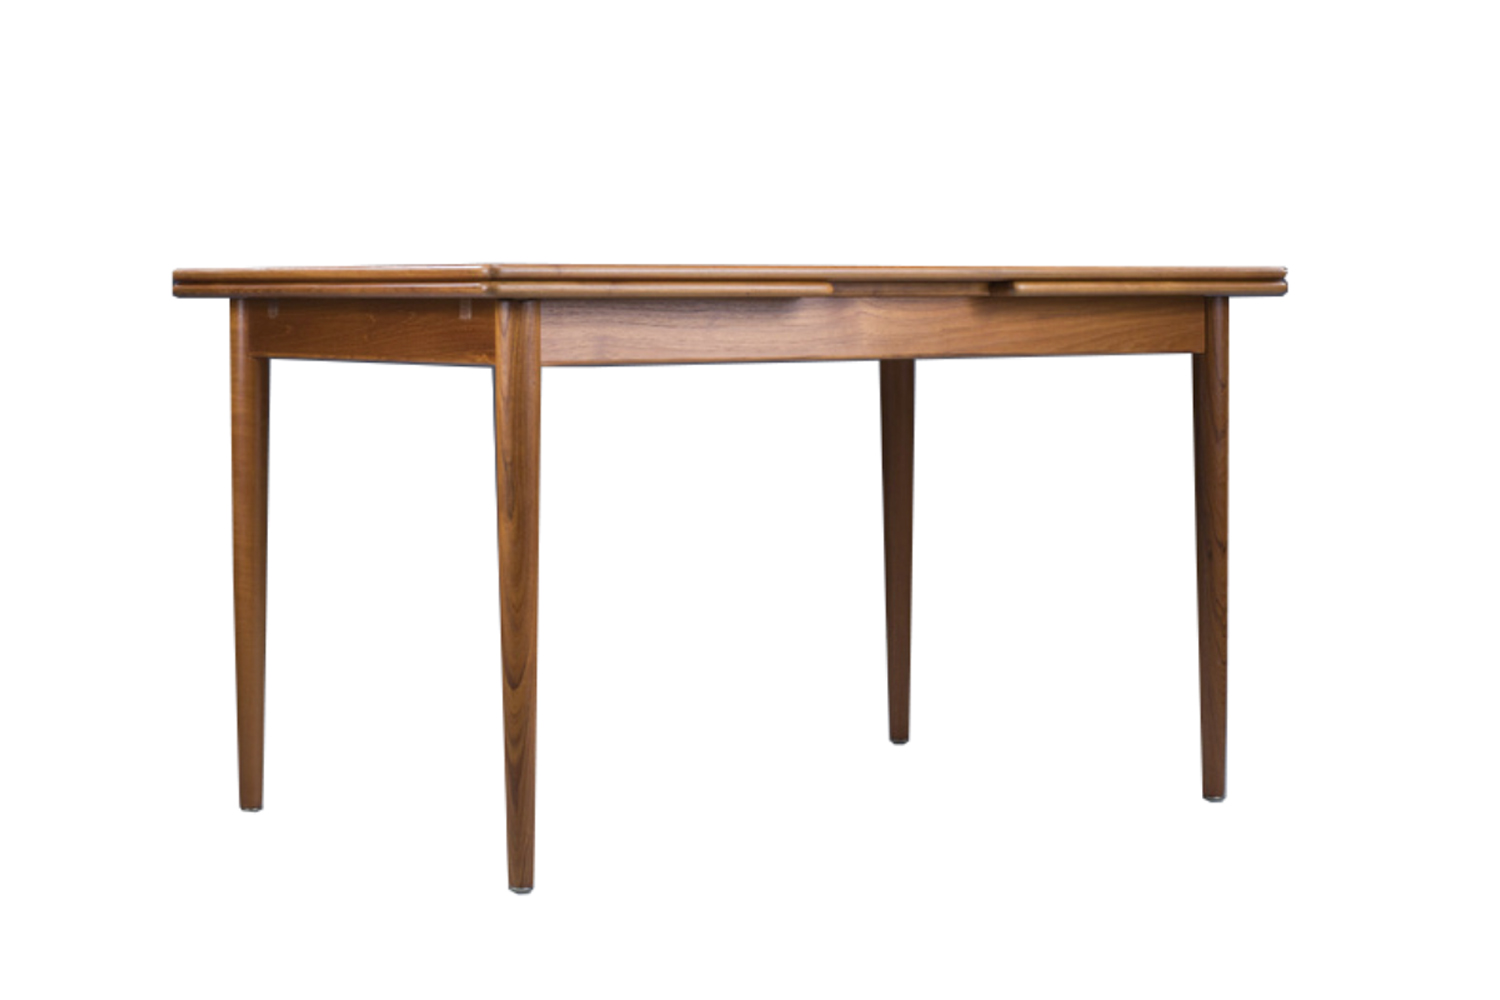 for something similar to the vintage robin day teak kitchen table, the \1960s t 18